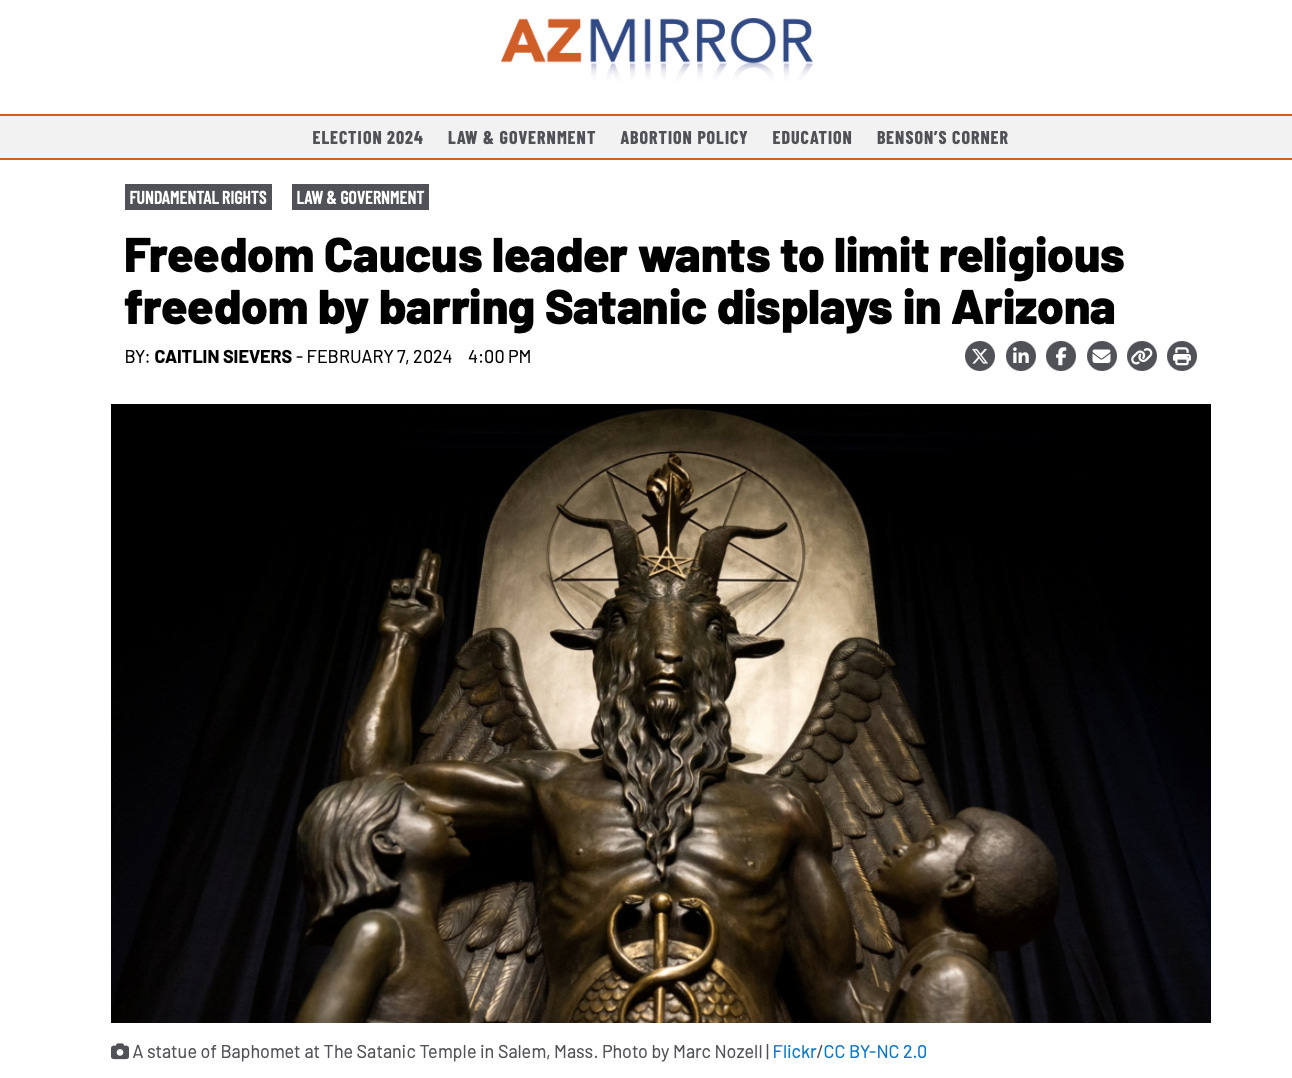 Headline from AZ mirror with picture of Baphomet statue, about the R.E.S.P.E.C.T. act